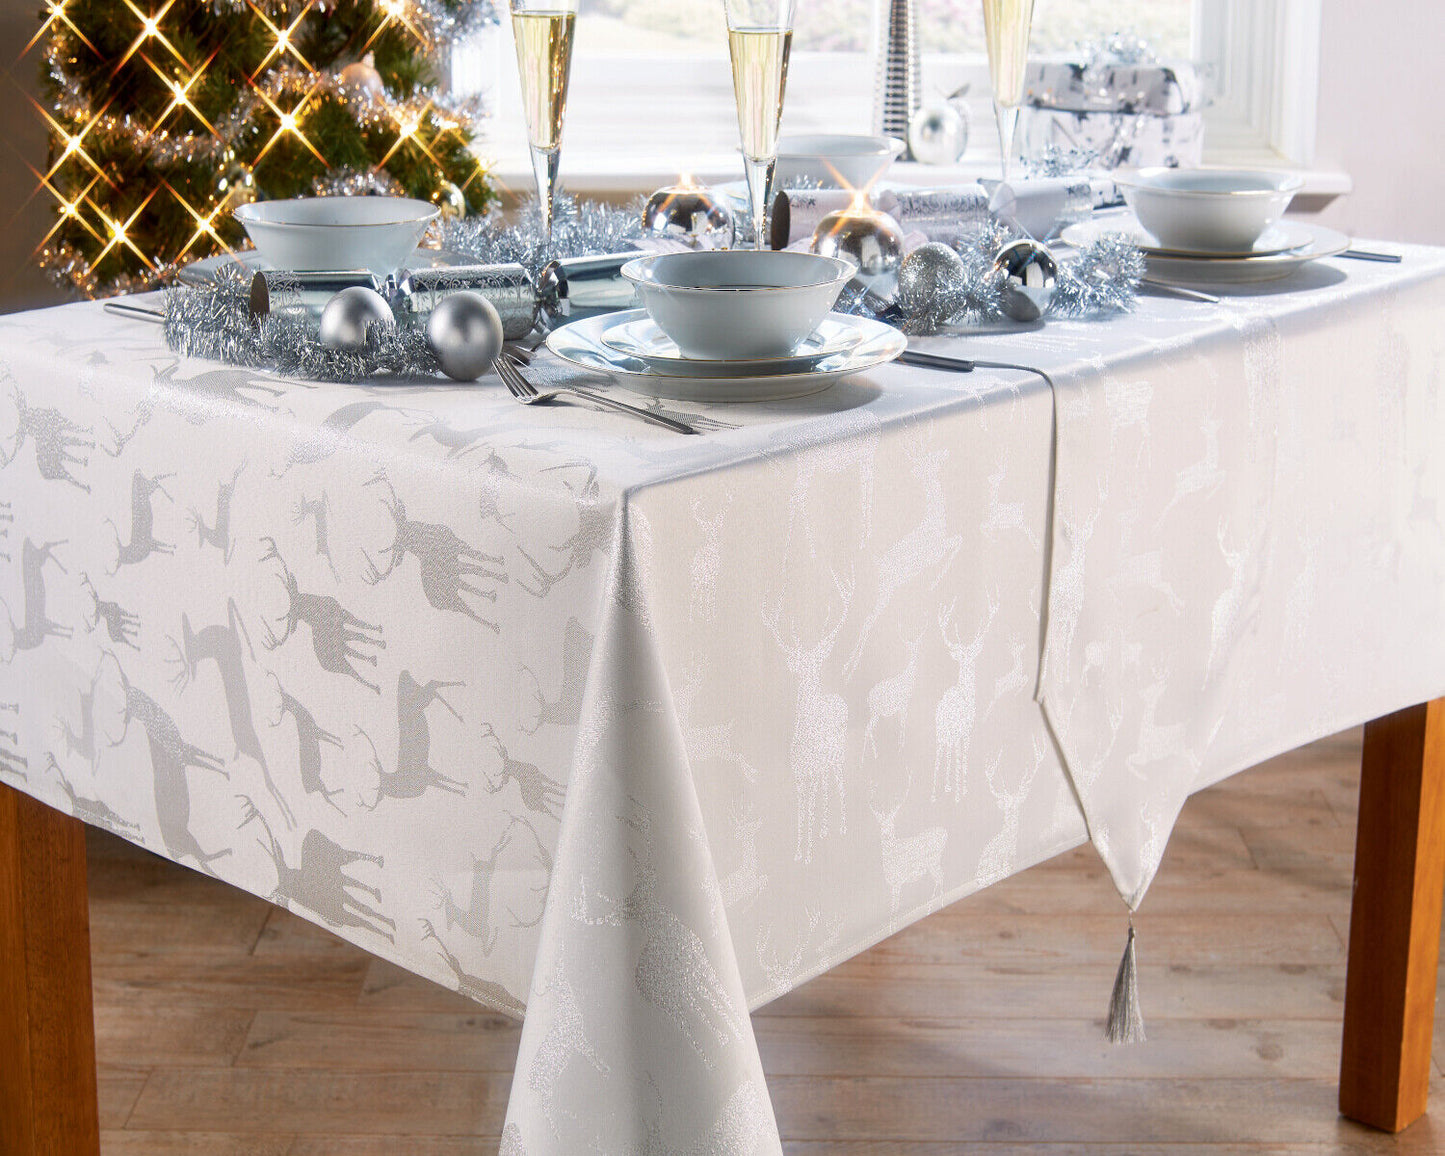 Large Stag Deer White Silver 54" x 72" Oblong Tablecloth 4 - 6 Place Setting Festive Dining